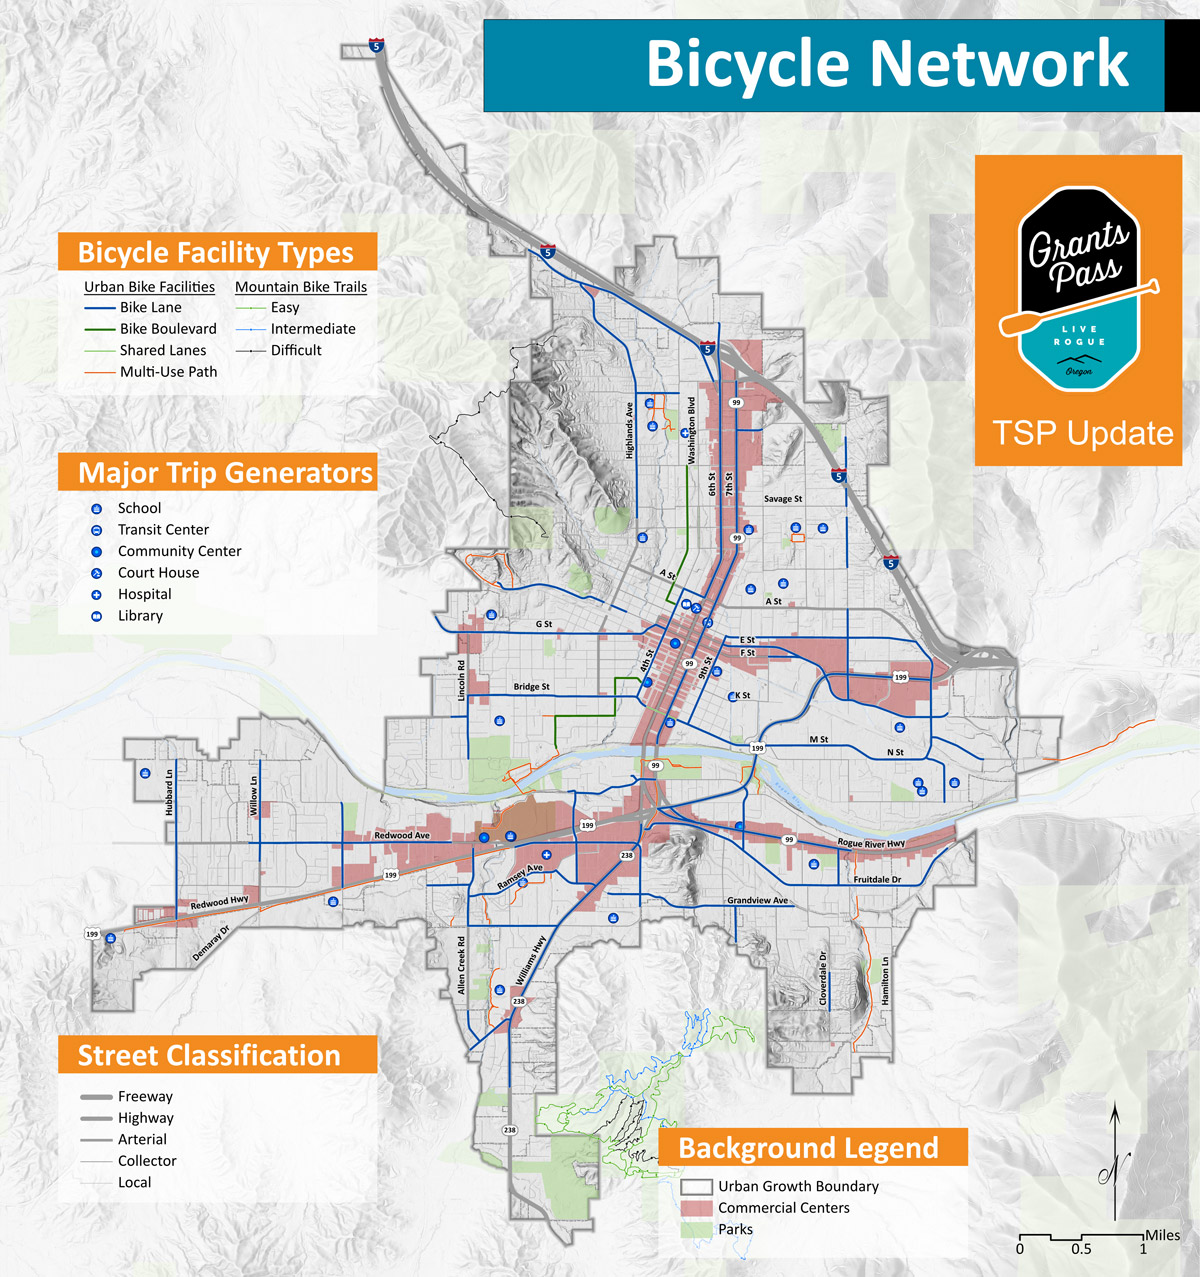 Existing Bicycle Network Map